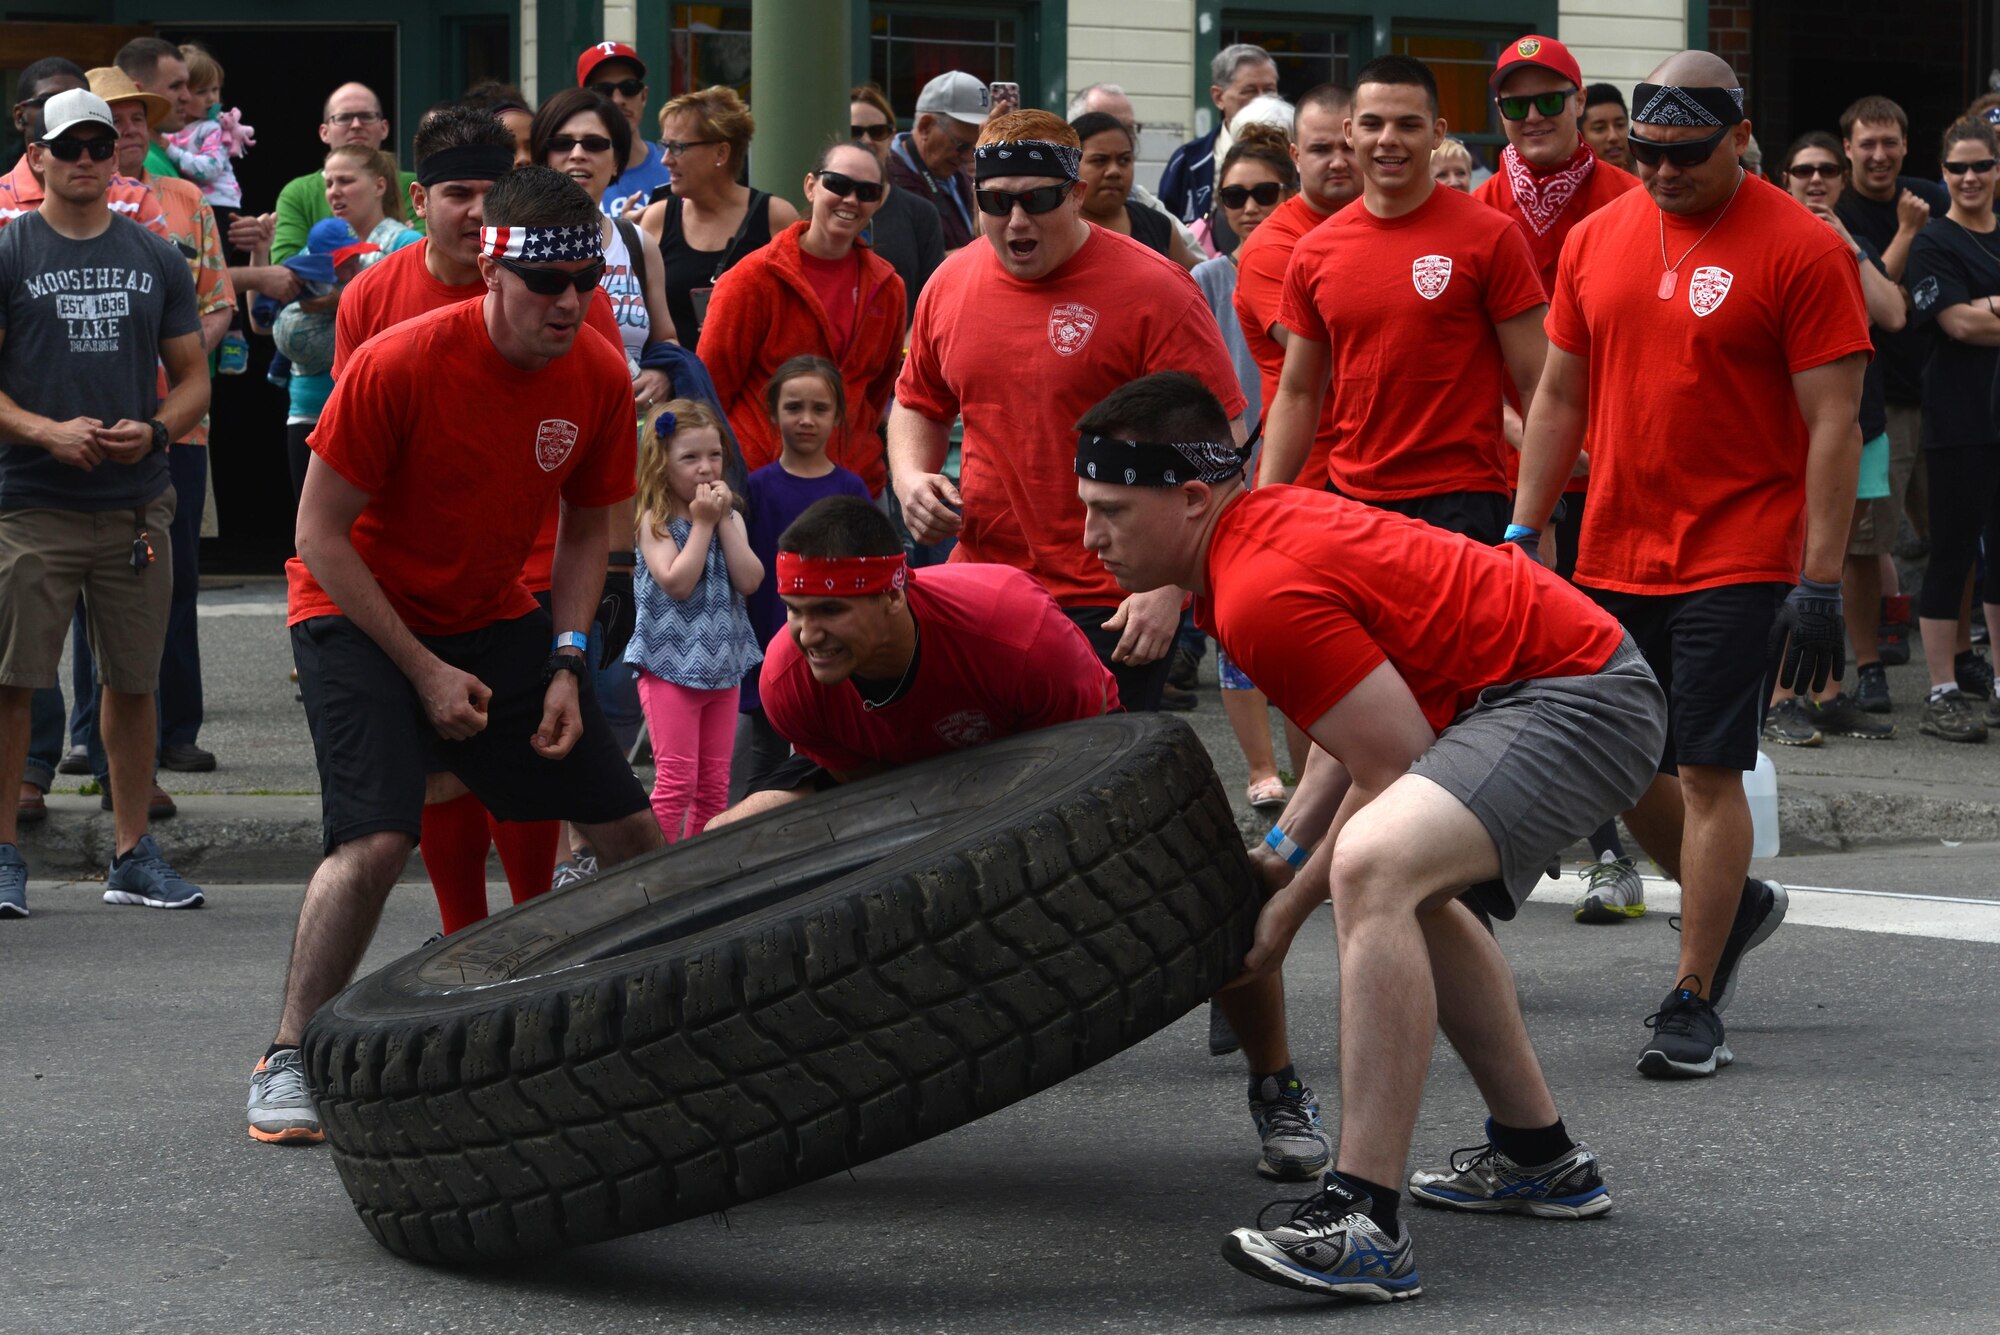 Two members of the ‘Firedawgs,’ Joint Base Elmendorf-Richardson Fire Department team, flip a tire as part of the Hero Games during the Downtown Summer Solstice Festival in Anchorage, Alaska, June 18, 2016. Each team chose two members to flip a tire across a set distance then roll it back. The Hero Games is a friendly competition between Alaska’s first responders with challenges that require balance, strength and teamwork. (U.S. Air Force photo Airman 1st Class Christopher R. Morales)